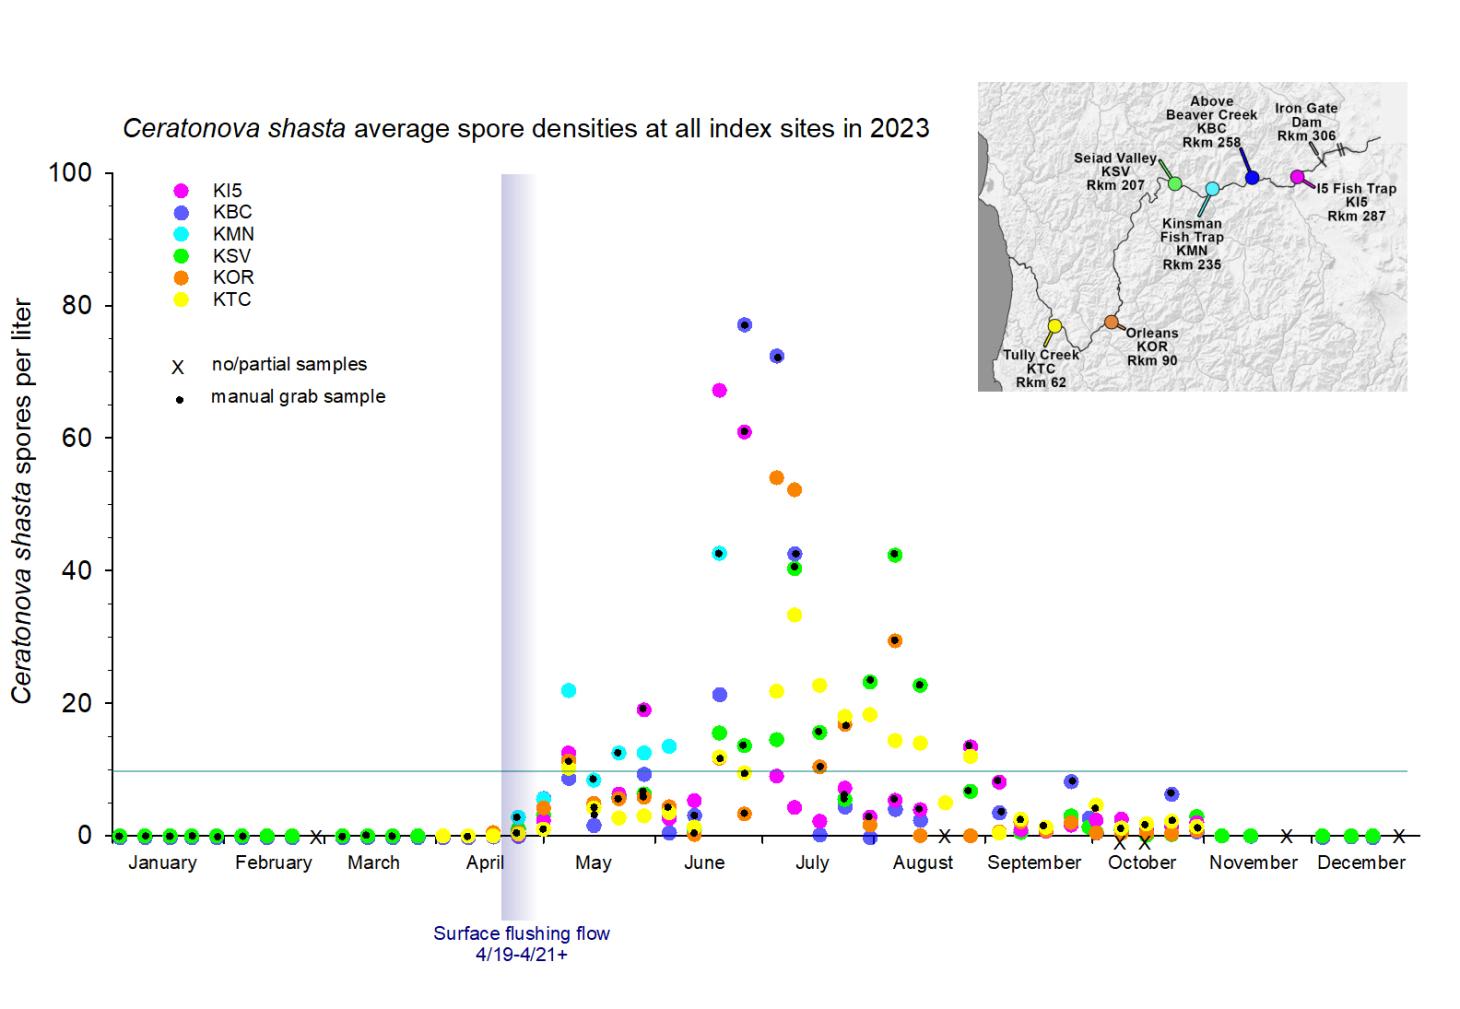 Graph showing the density of waterborne Ceratonova shasta at the index sites in the lower Klamath basin in 2023.